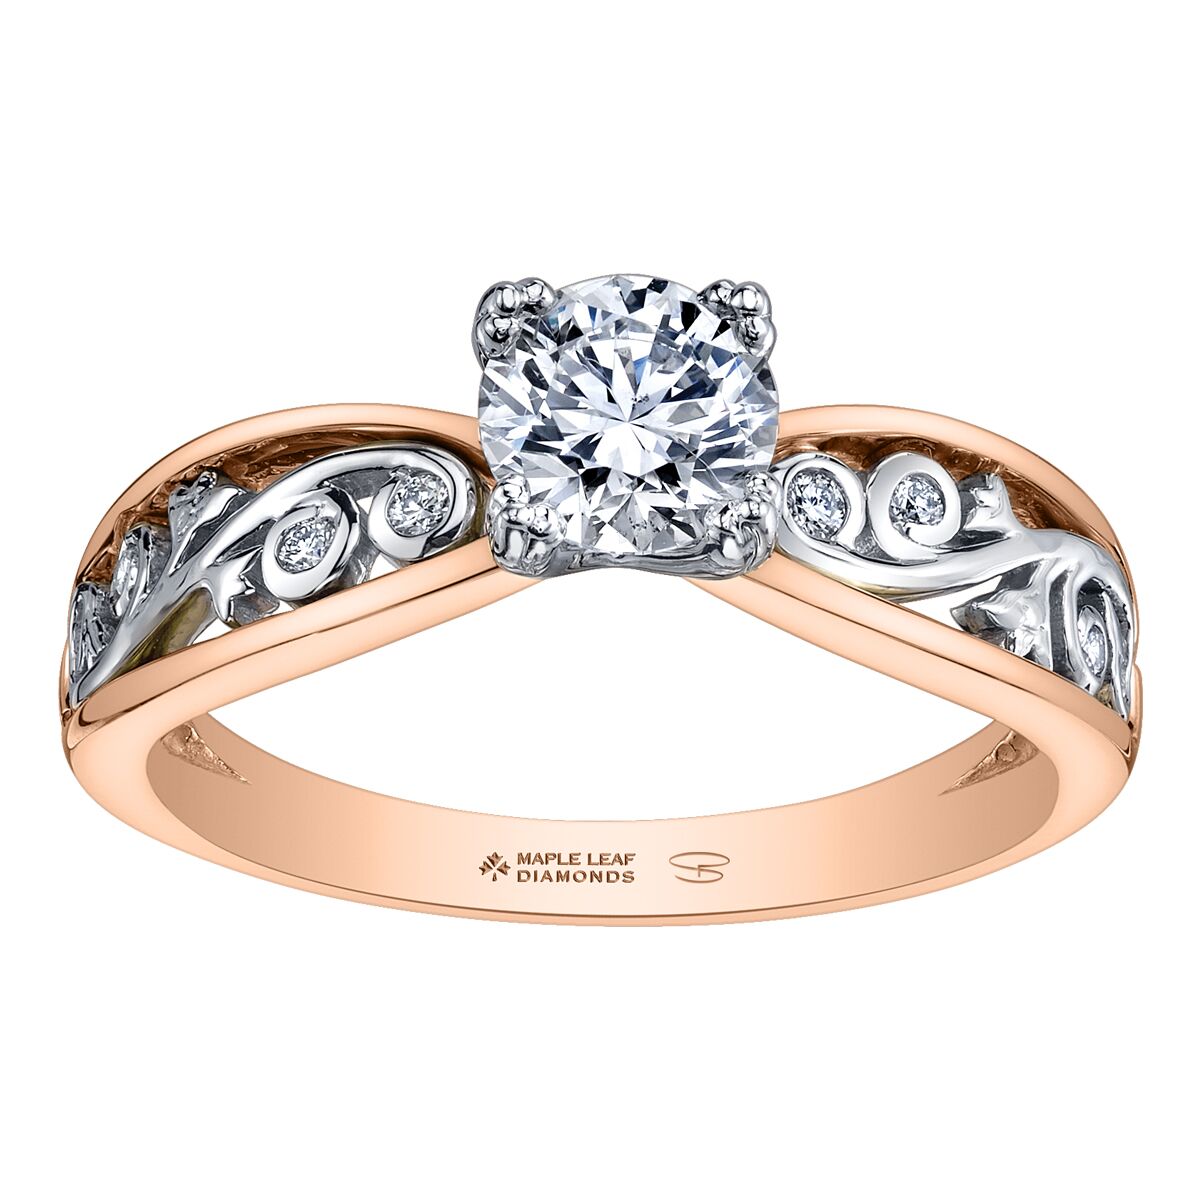 Christopher Designs Fashion Ring - Provident Jewelry